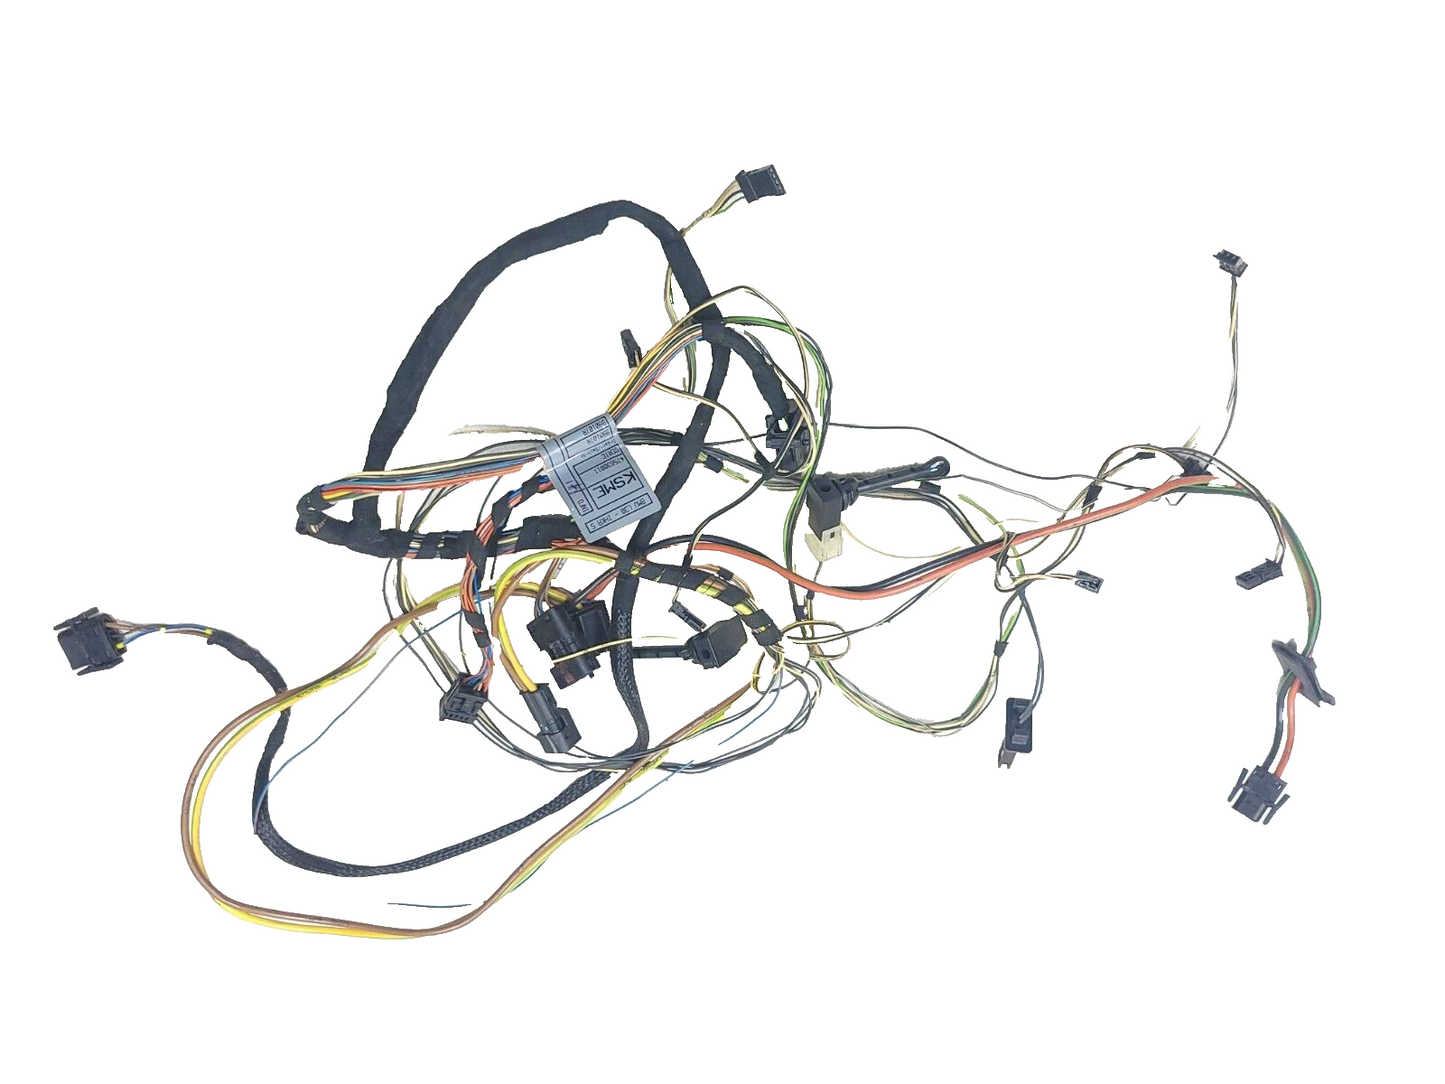 2006-2009 Range Rover Heater Wire Harness OEM